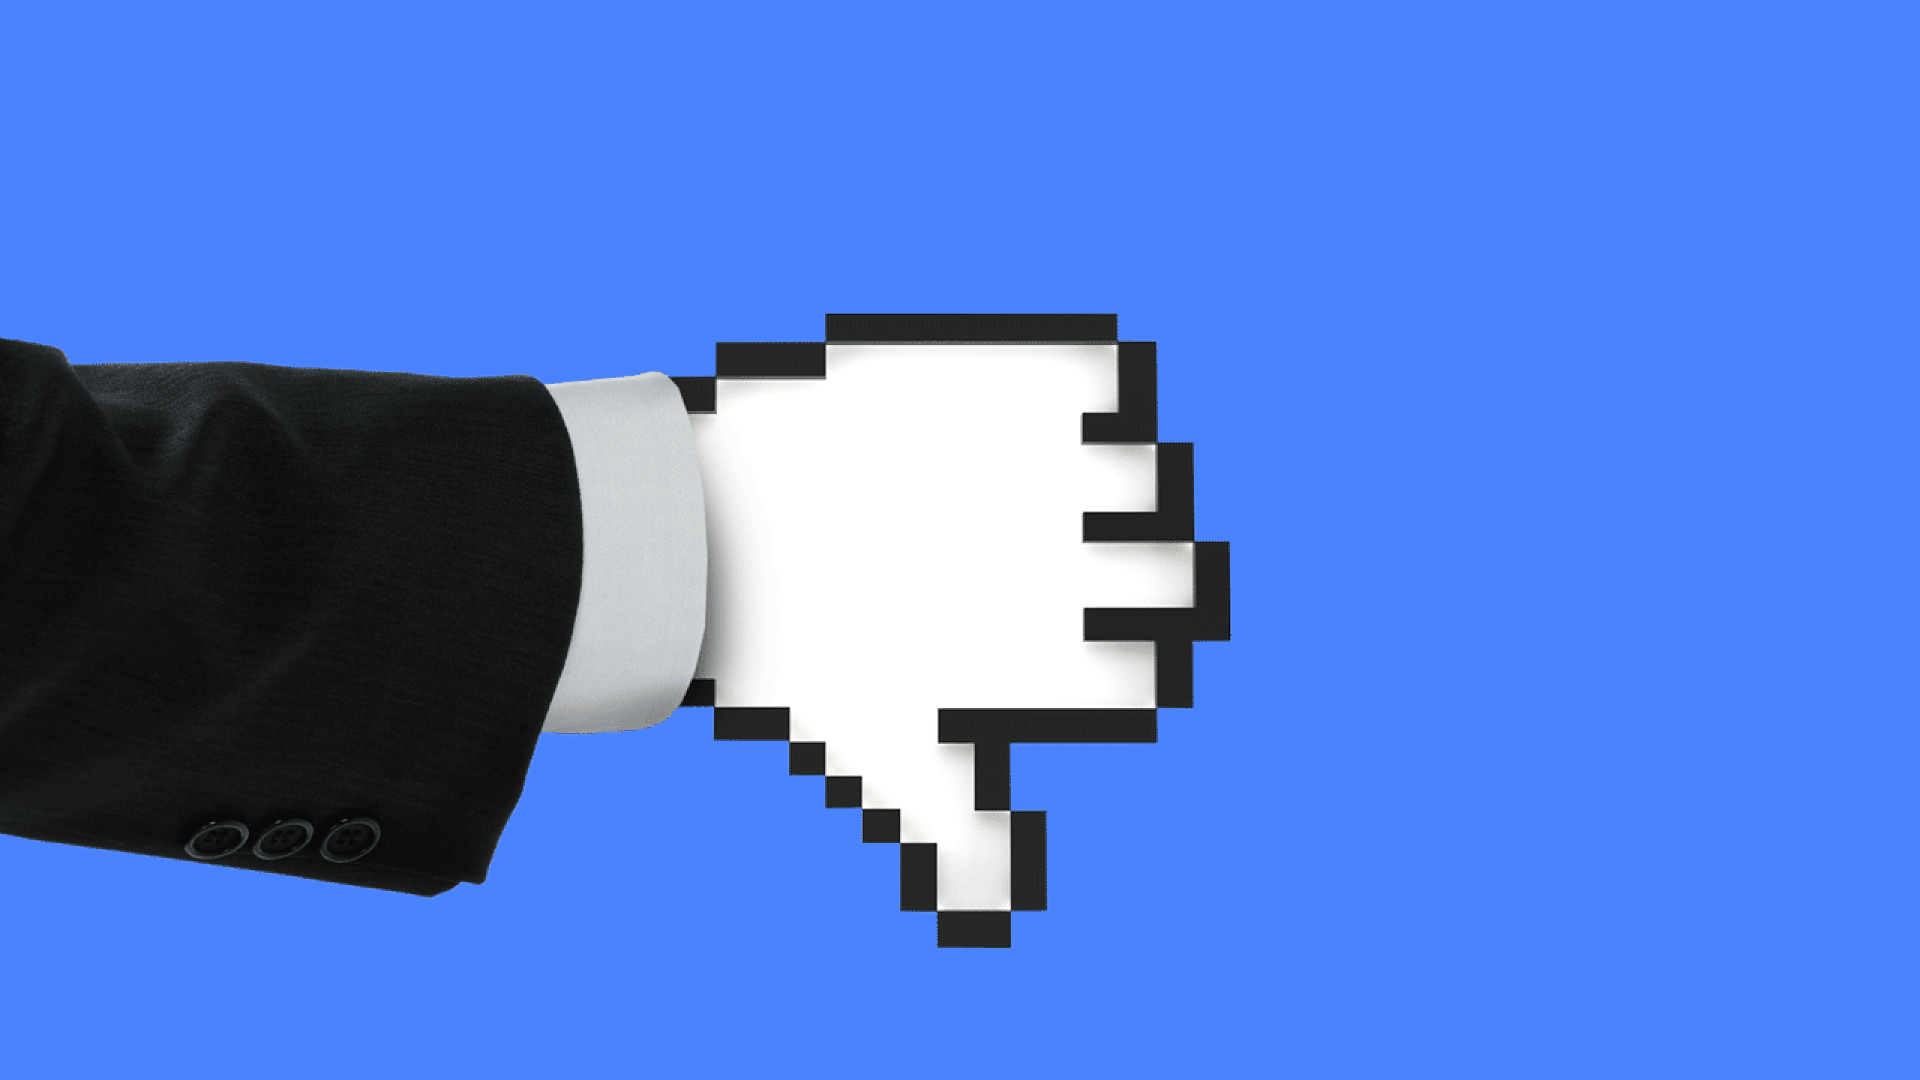 Animated illustration of a suited arm with a digital cursor thumbs up turning to thumbs down